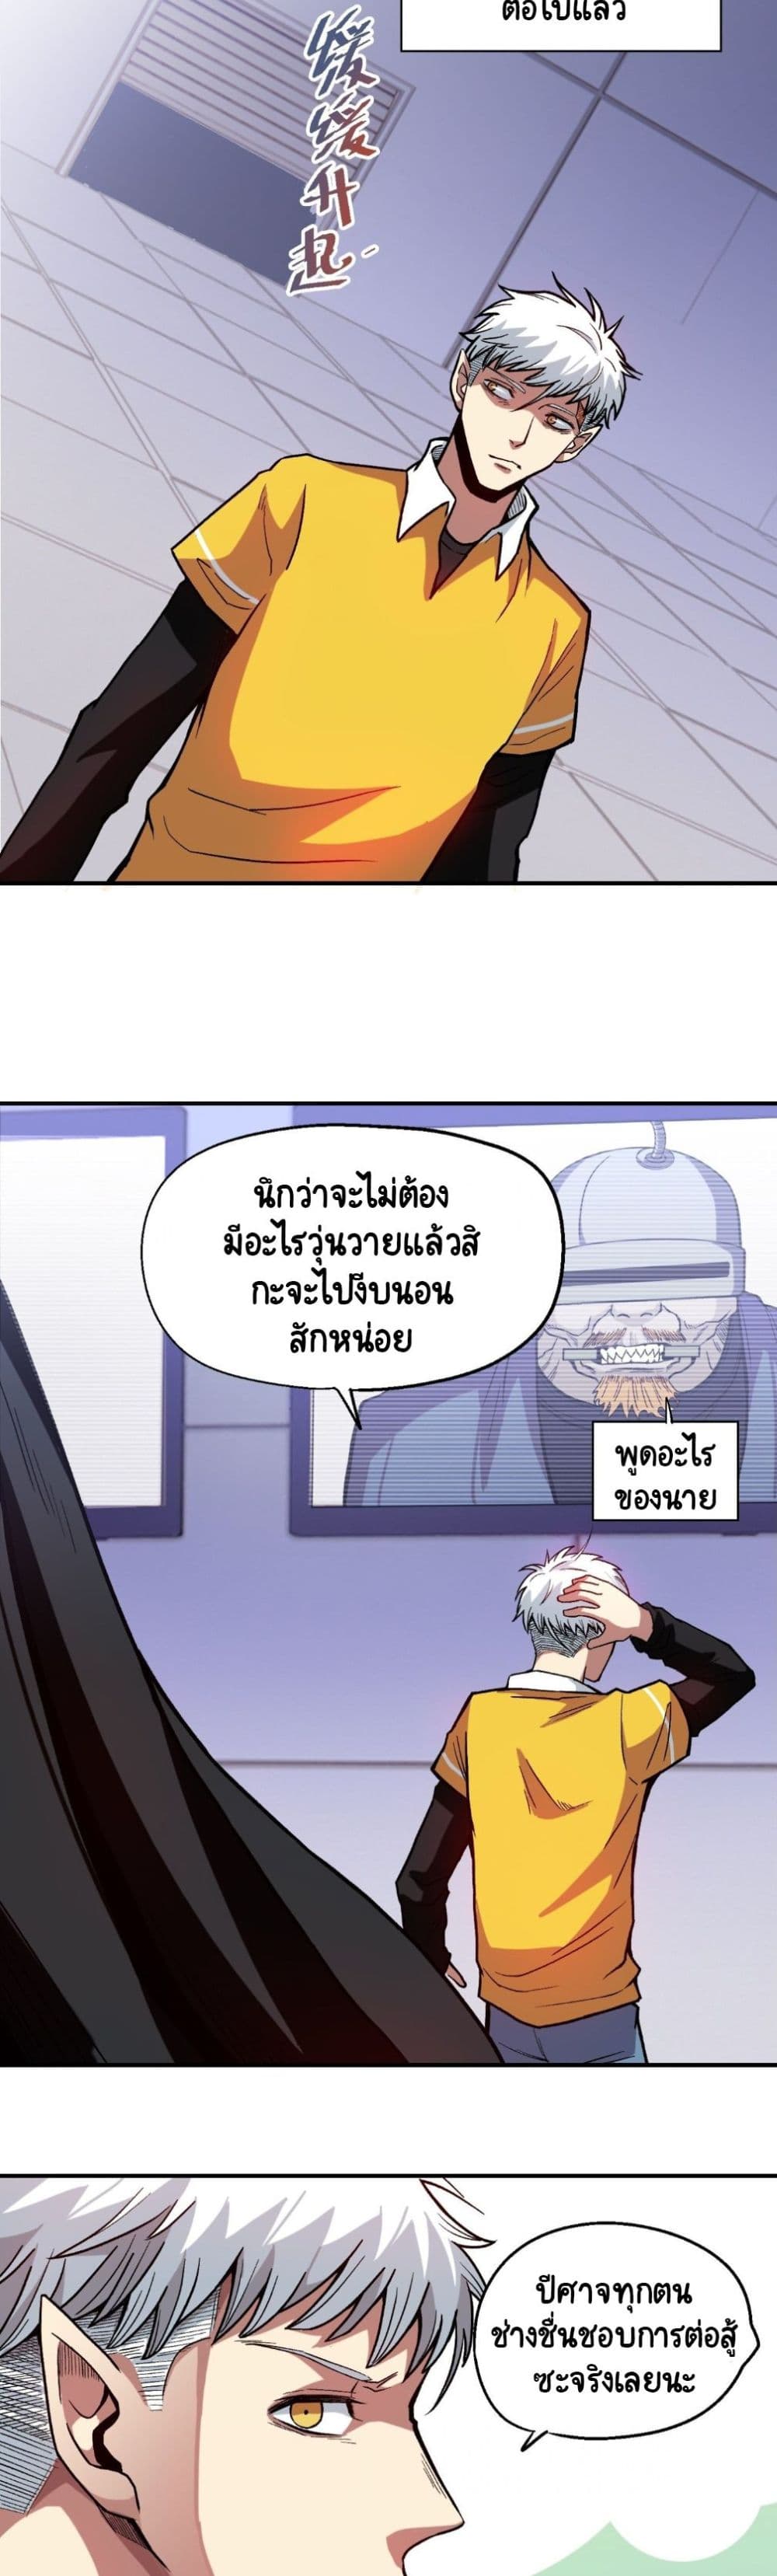 Wicked Person Town ตอนที่ 8 (18)